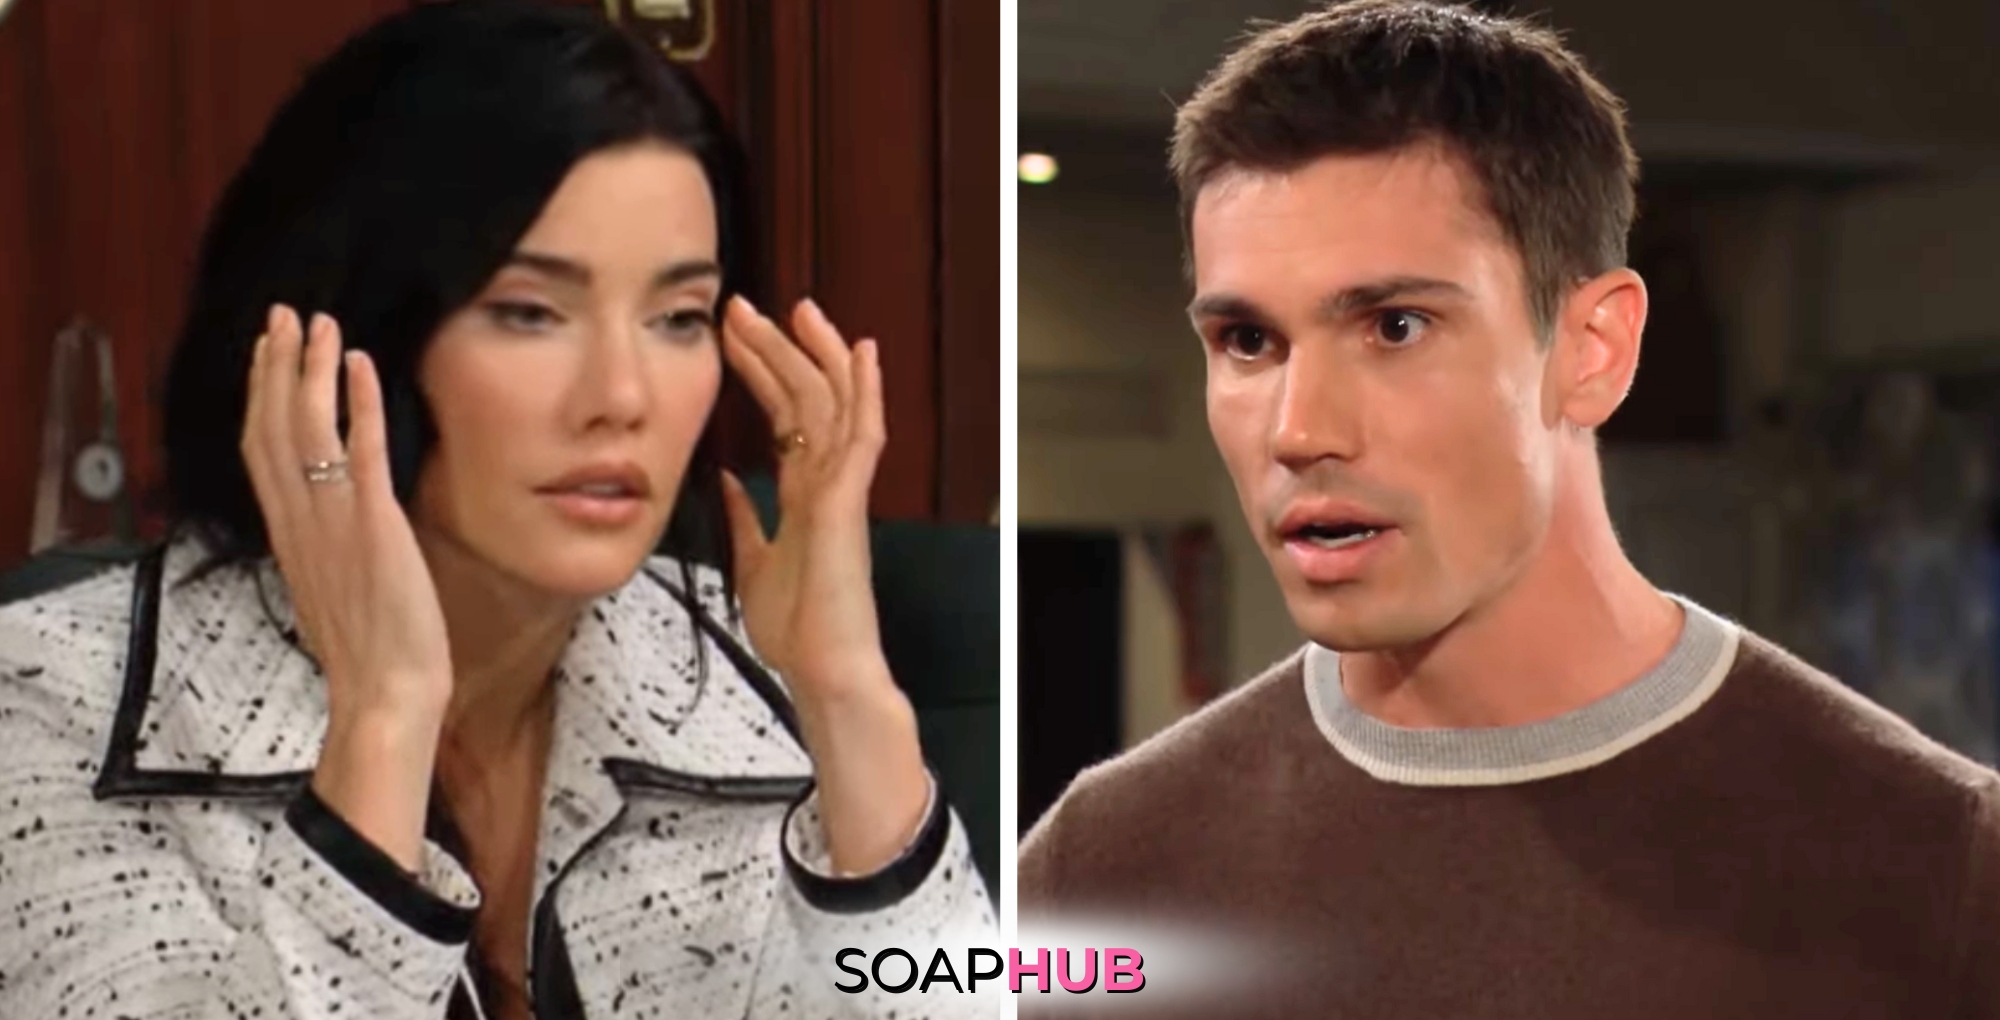 Bold and the Beautiful Spoilers for Thursday, May 9, Episode 9268 Features Steffy and Finn with the Soap Hub Logo Across the Bottom.